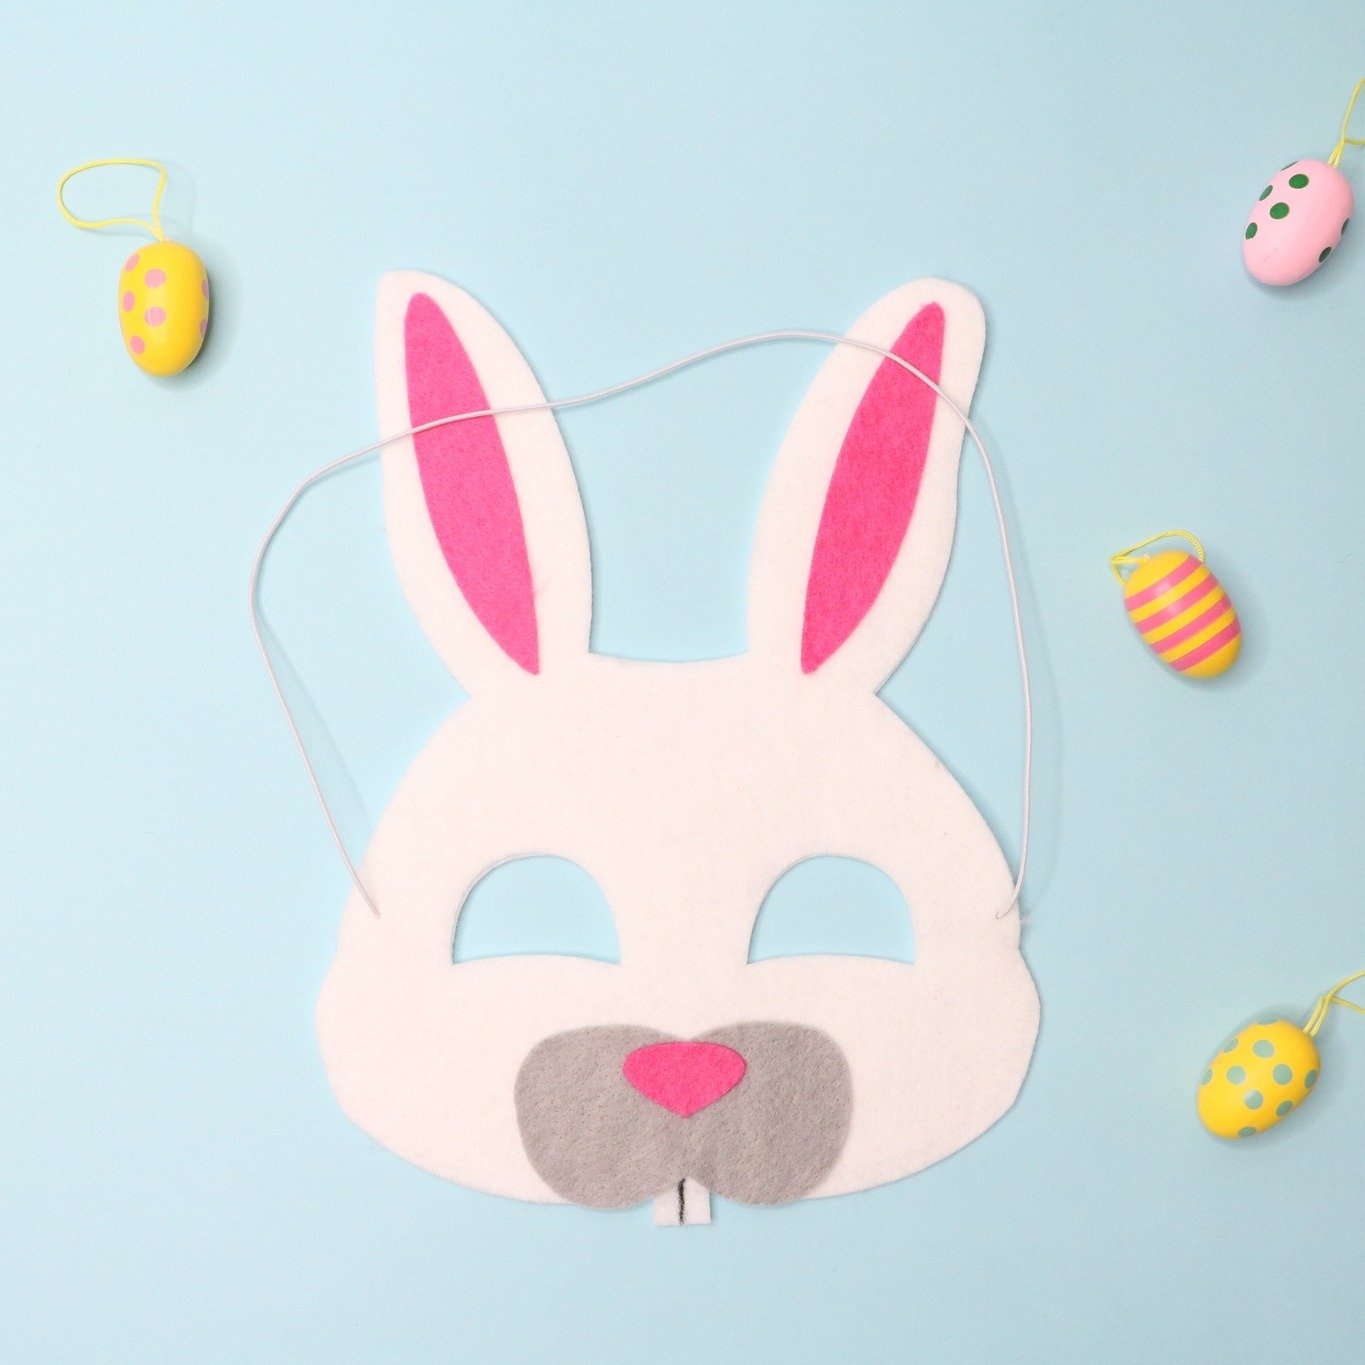 Who says you need sewing skills to make a creative and fun face mask? My FREE Bunny Mask Template and step-by-step instructions make it quick and easy to create a cute and festive Felt Bunny Rabbit Face Mask 🐰. Perfect for Easter 🐇🐣
https://www.fu